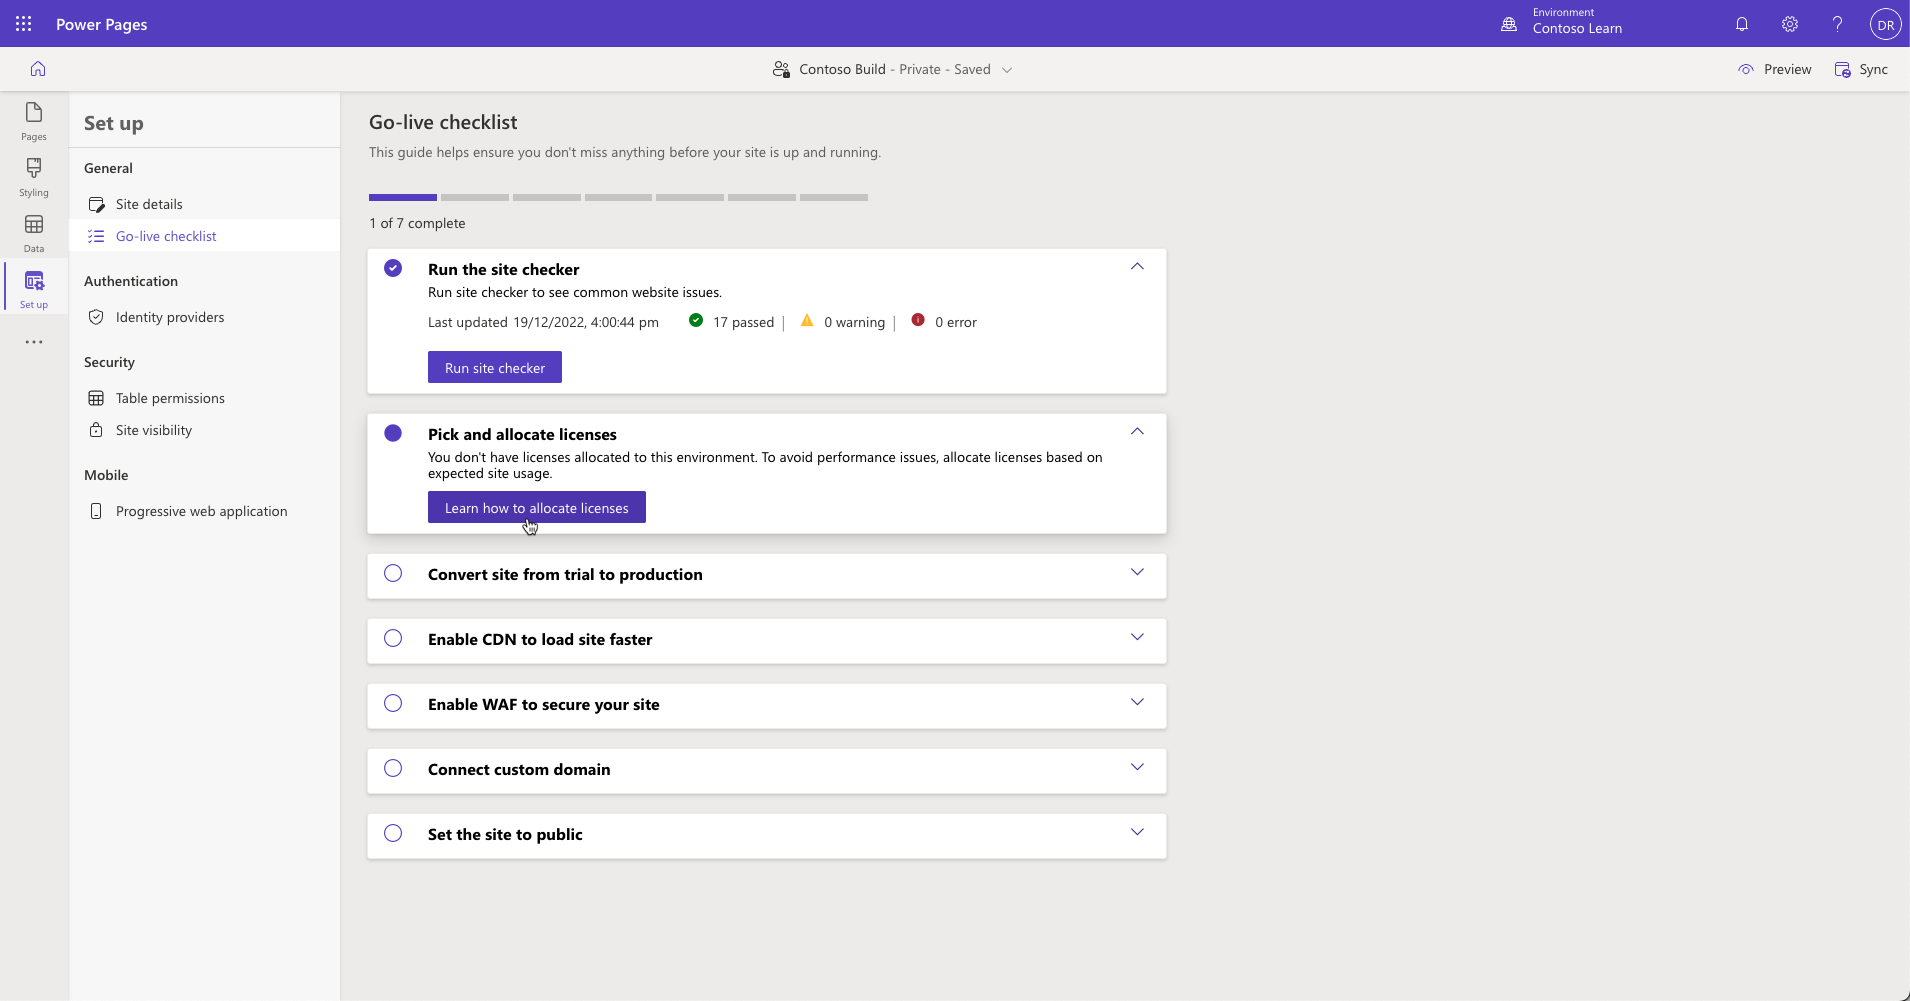 Screenshot of the Go-live checklist screen in Power Pages design studio.